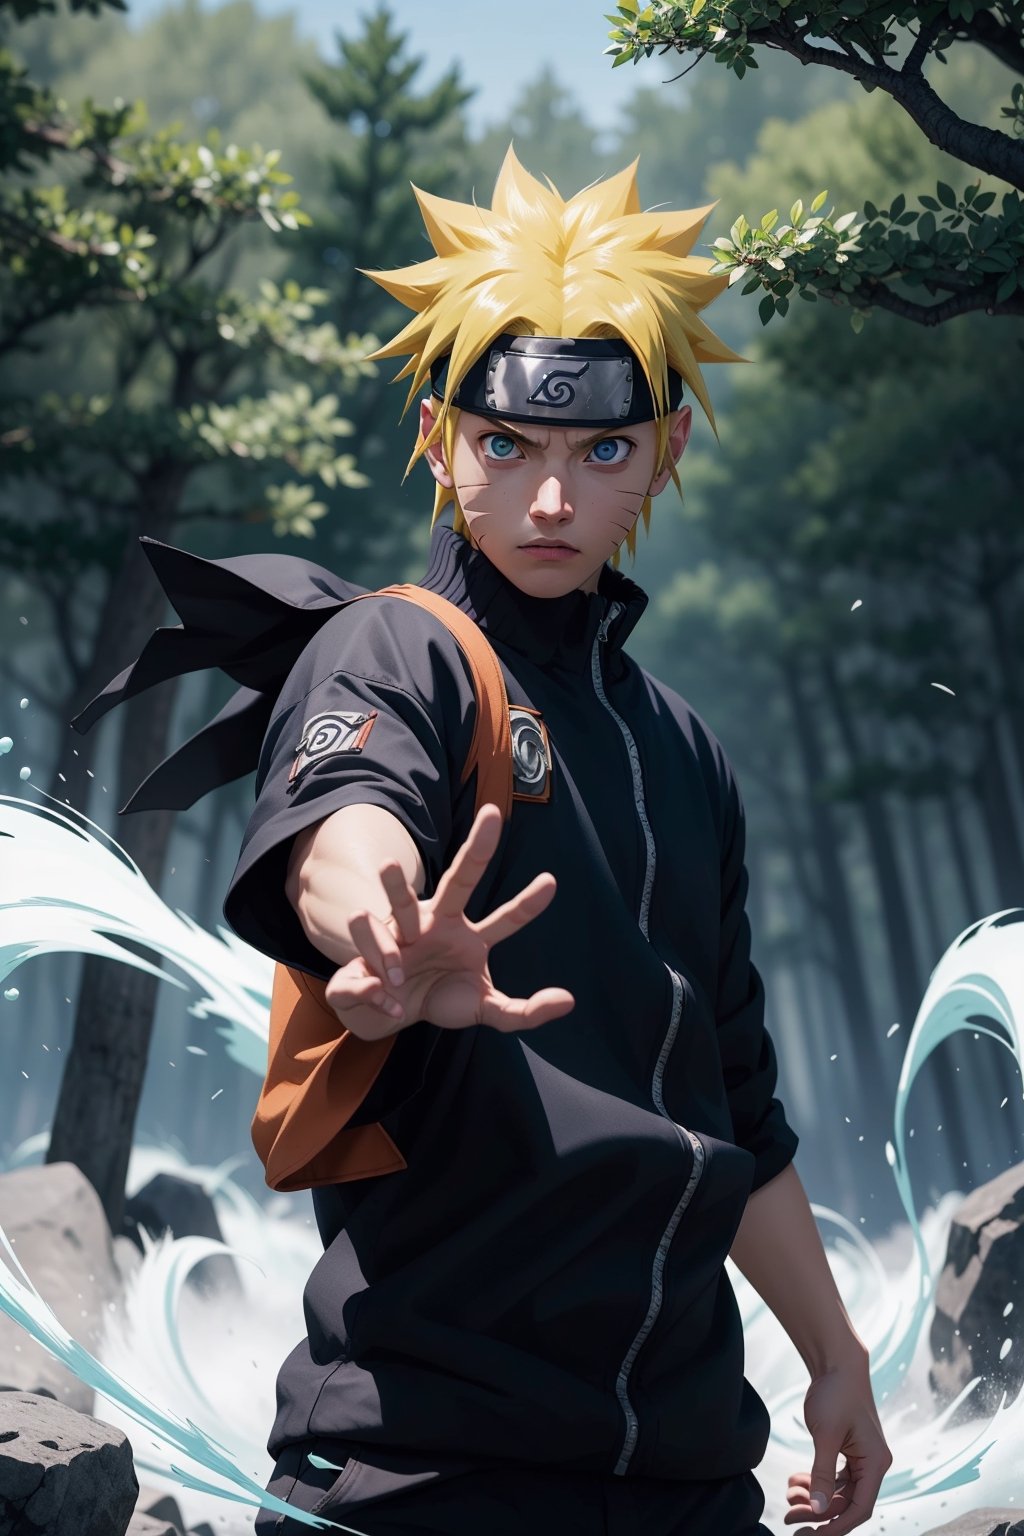 "Generate an image of Naruto Uzumaki from the popular anime series 'Naruto' using his signature jutsu, the 'Rasengan.' Naruto stands with determination, his blond hair flowing, and his bright blue eyes focused. He holds his palm out, surrounded by swirling chakra that forms the Rasengan, a spiraling sphere of energy. The scene is set against a backdrop of a lush forest, with leaves rustling in the wind as Naruto's power radiates through the air. Capture the essence of Naruto's spirit and determination as he unleashes his formidable ninja abilities.",n4rut0